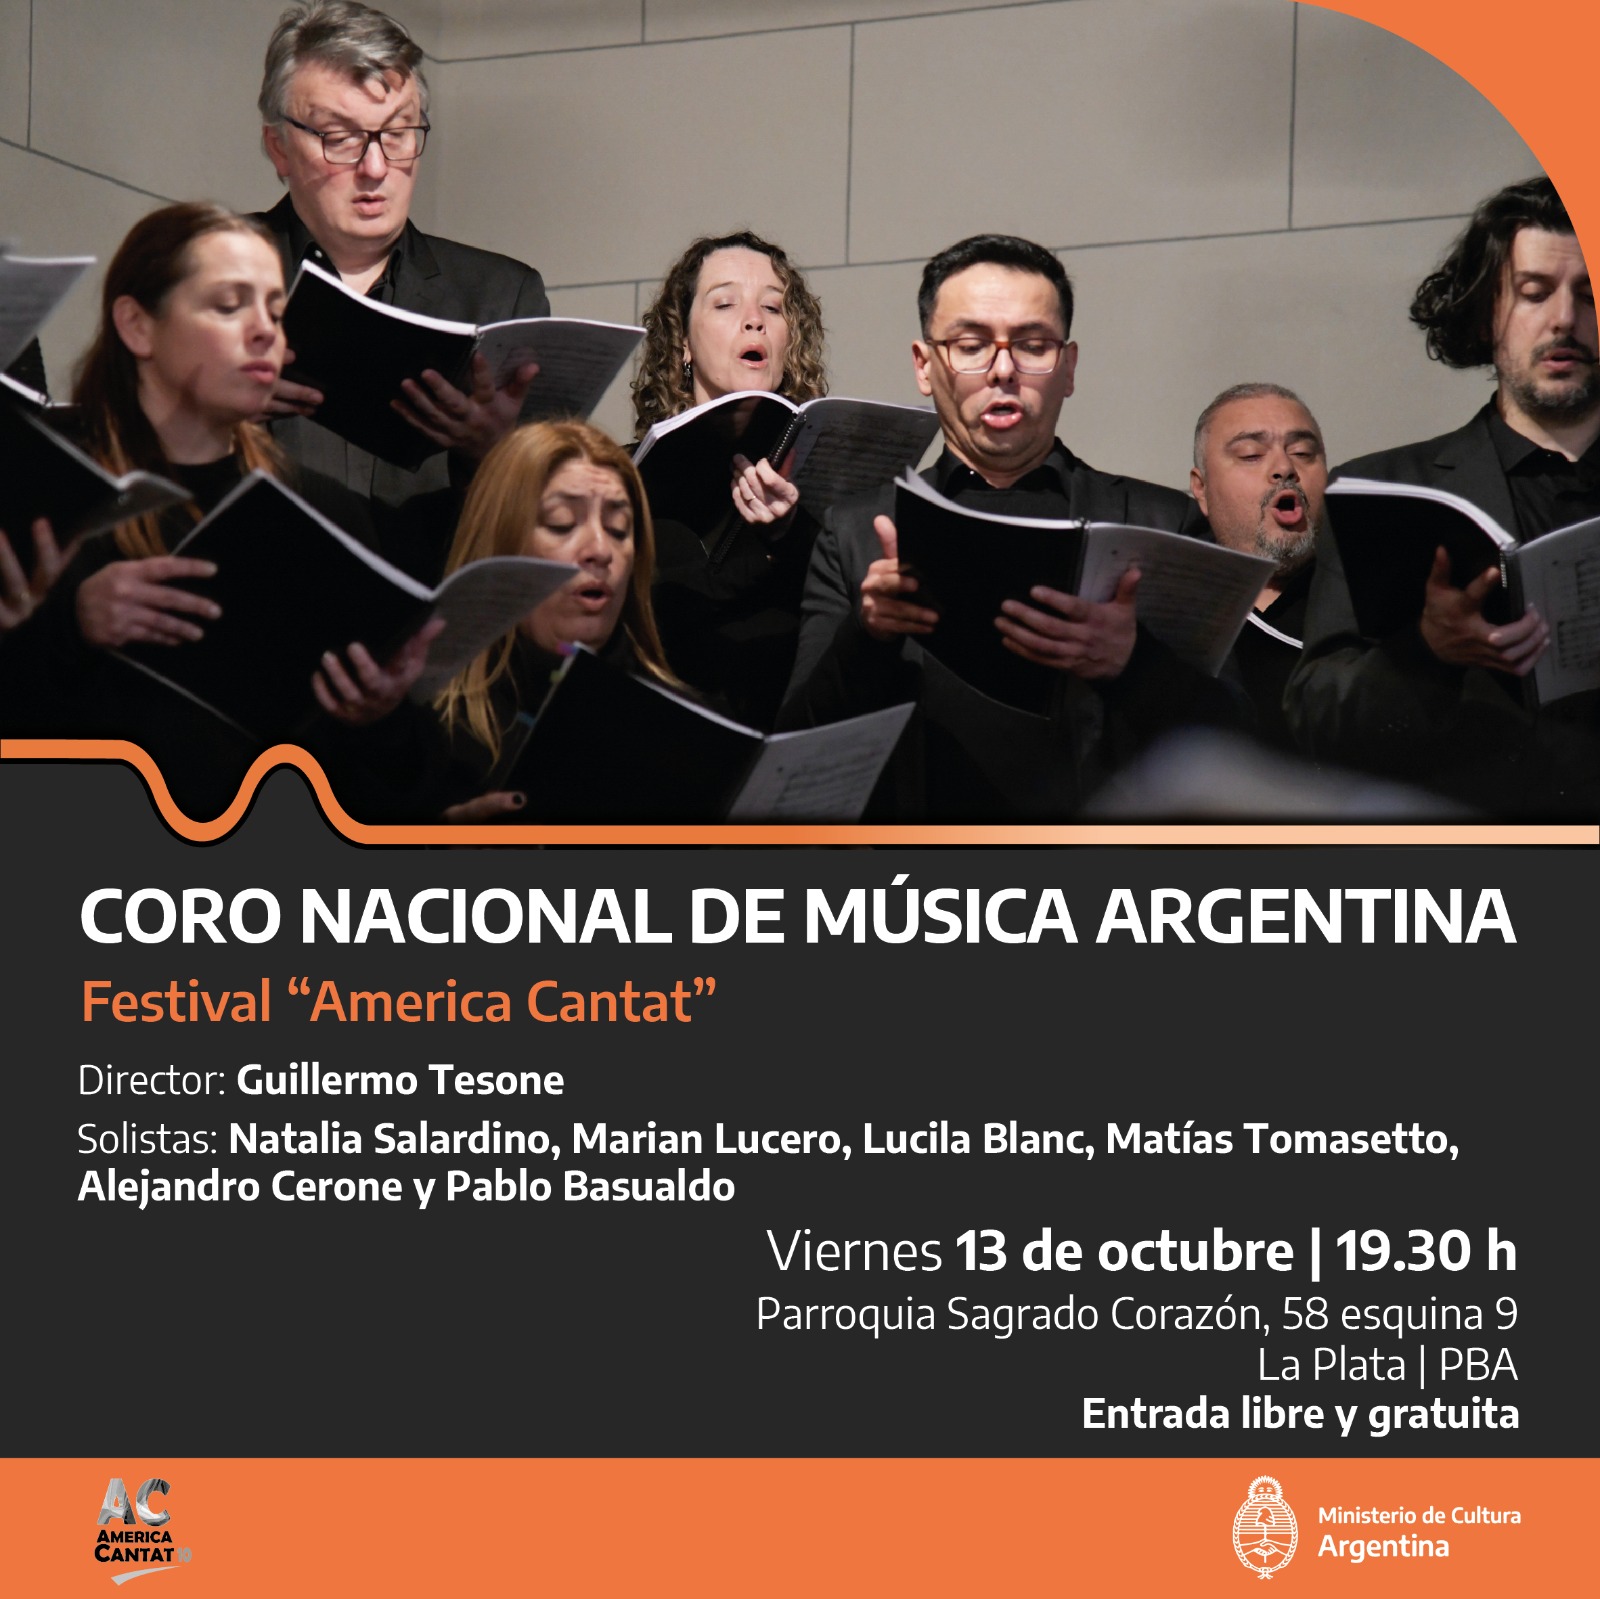 Argentine National Music Choir to Perform Special Concert at Festival of the Argentine Association for Choral Music ‘America Cantat’